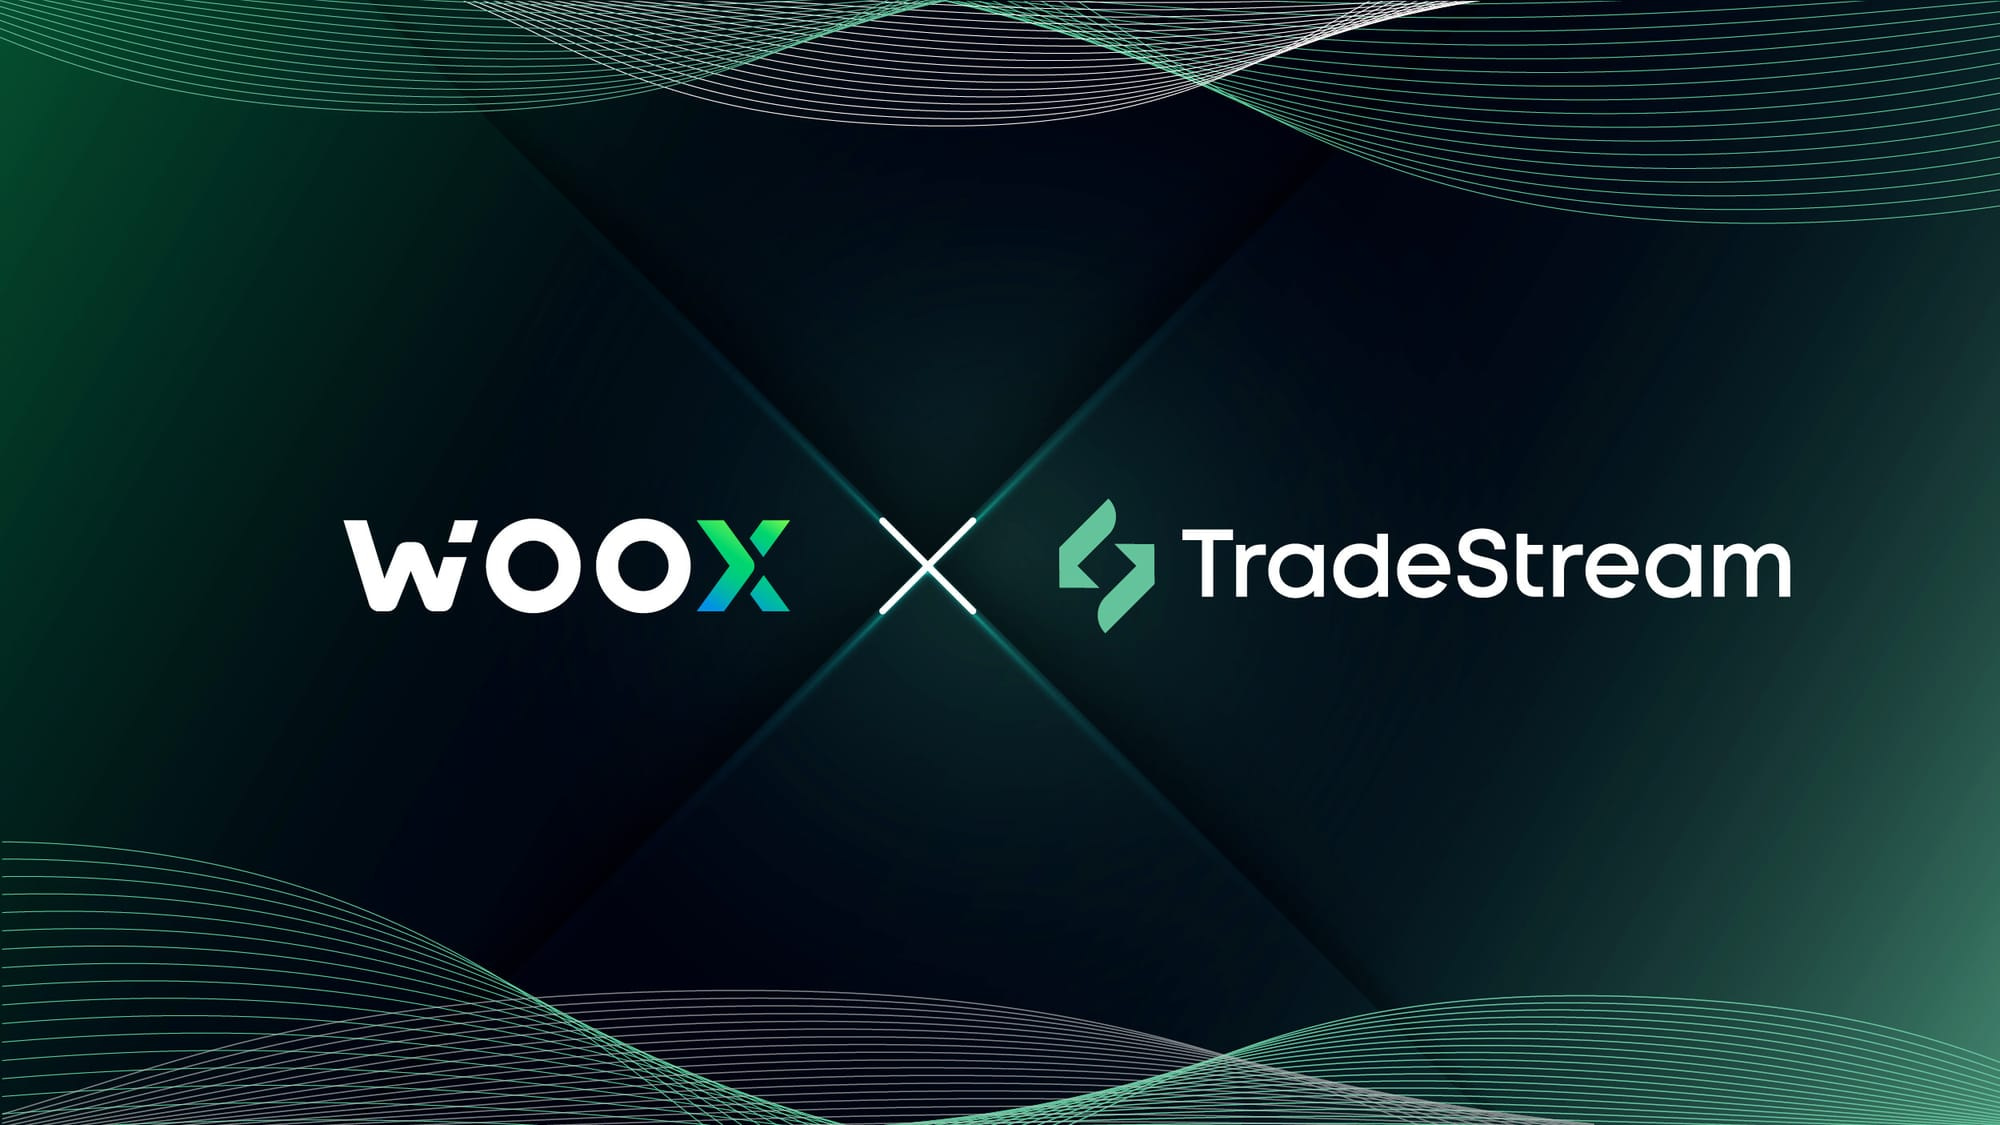 WOO X is integrated with a free auto-trading journal, TradeStream